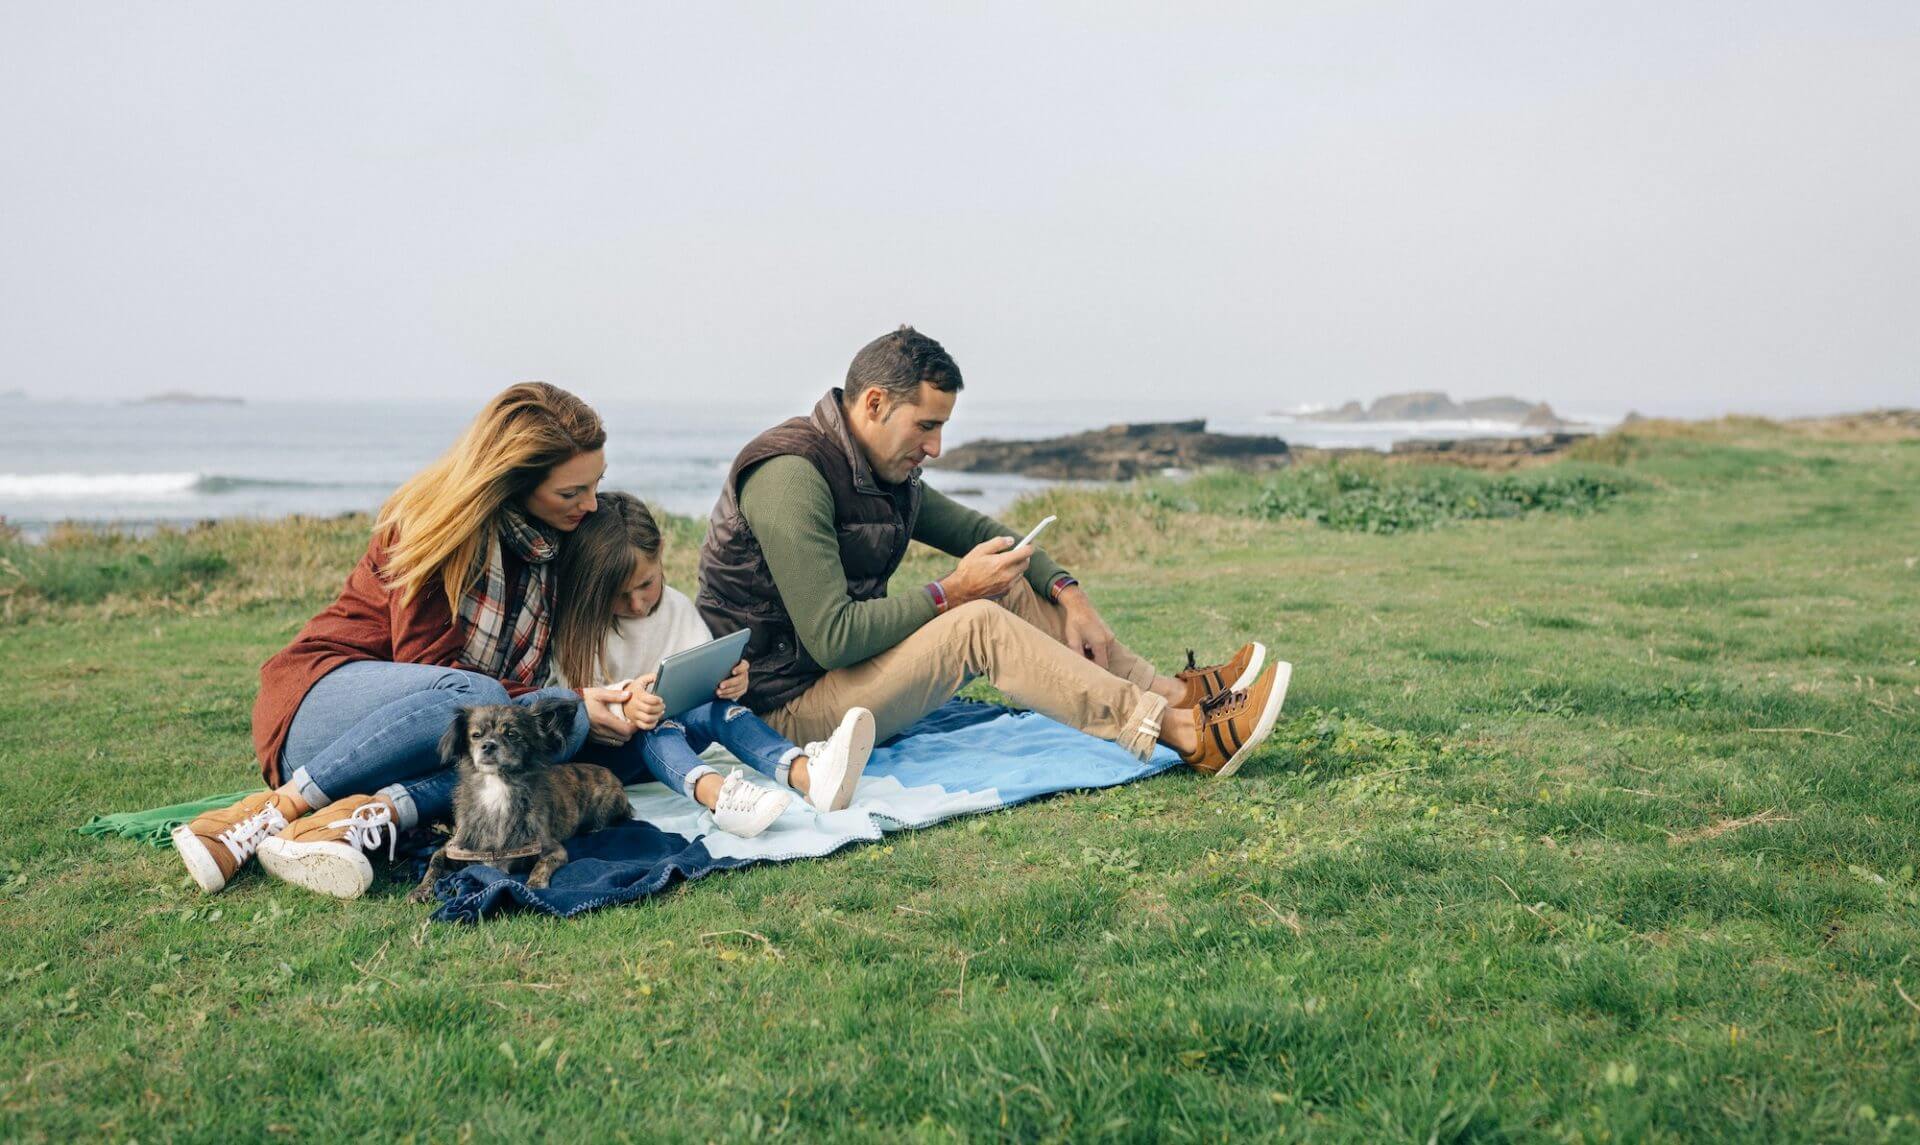 Family with dog sitting on blanket at the coast using wireless devices